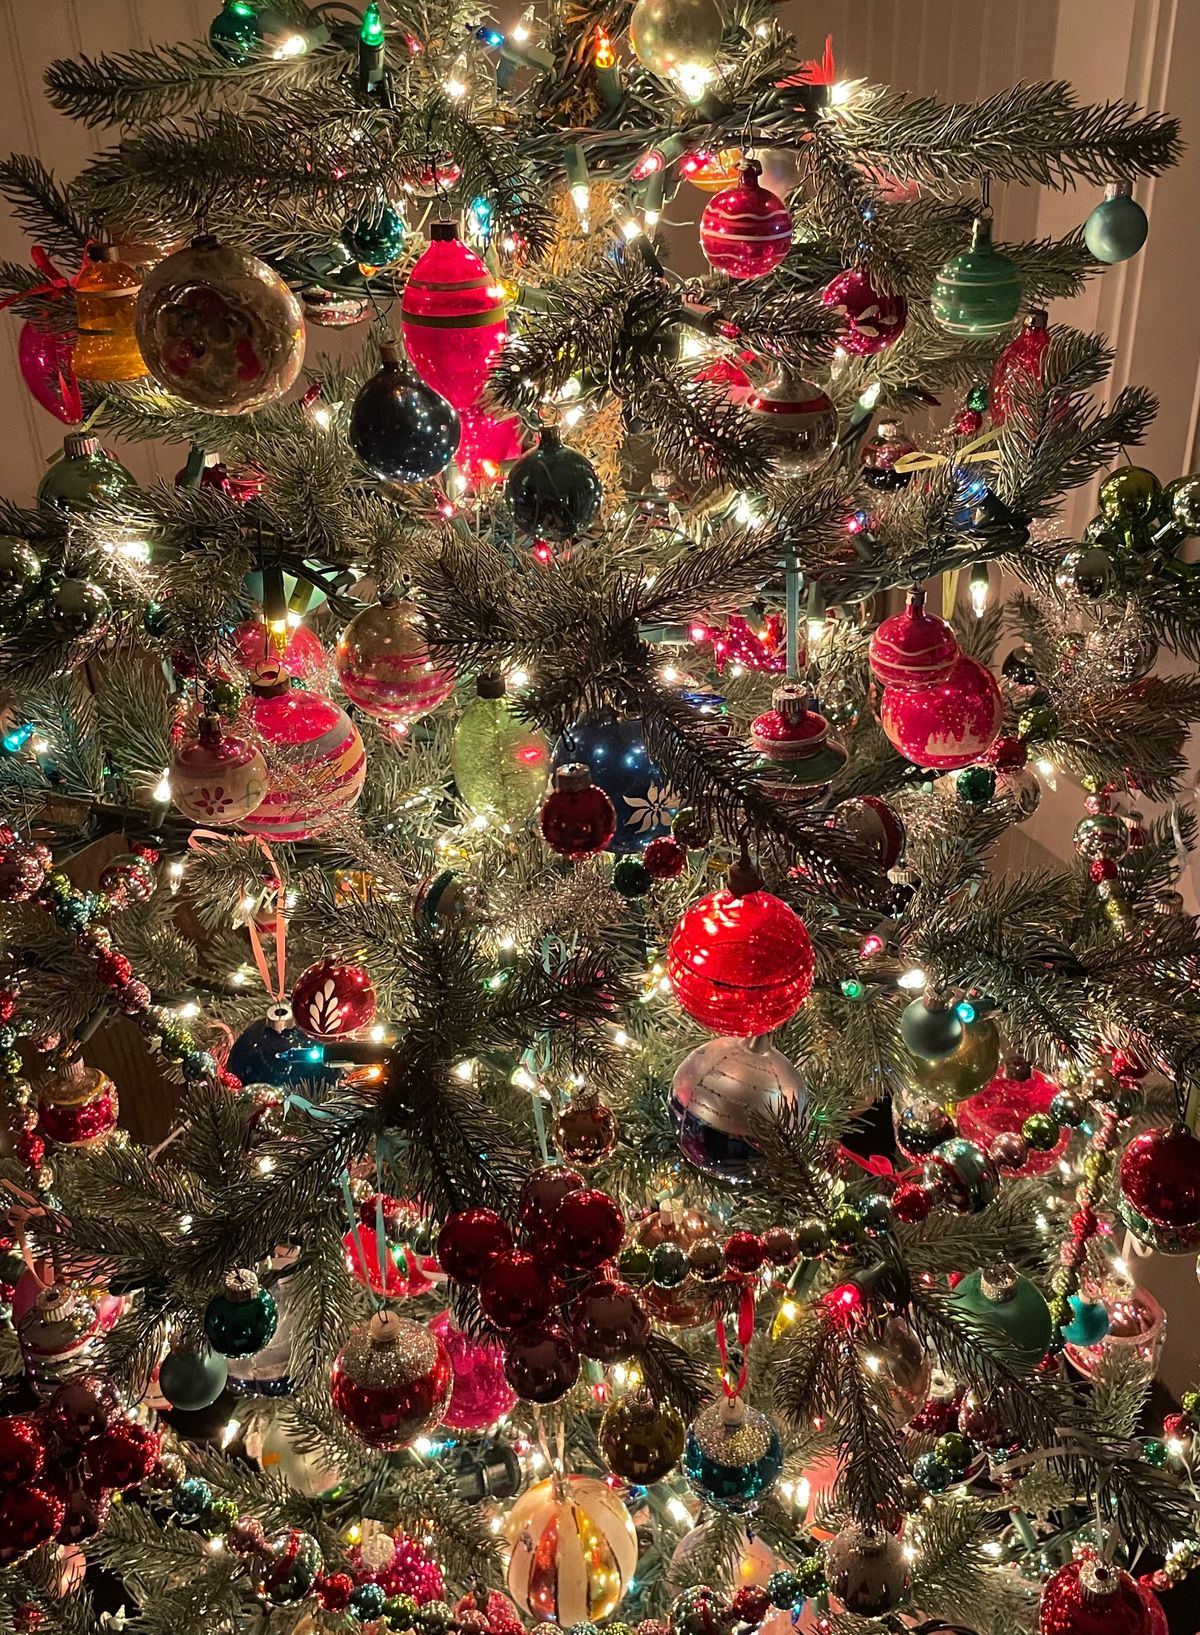 Sam Walter's Christmas Tree Hack on full display in he and fiancé Marcus Hoey's Provincetown cottage.